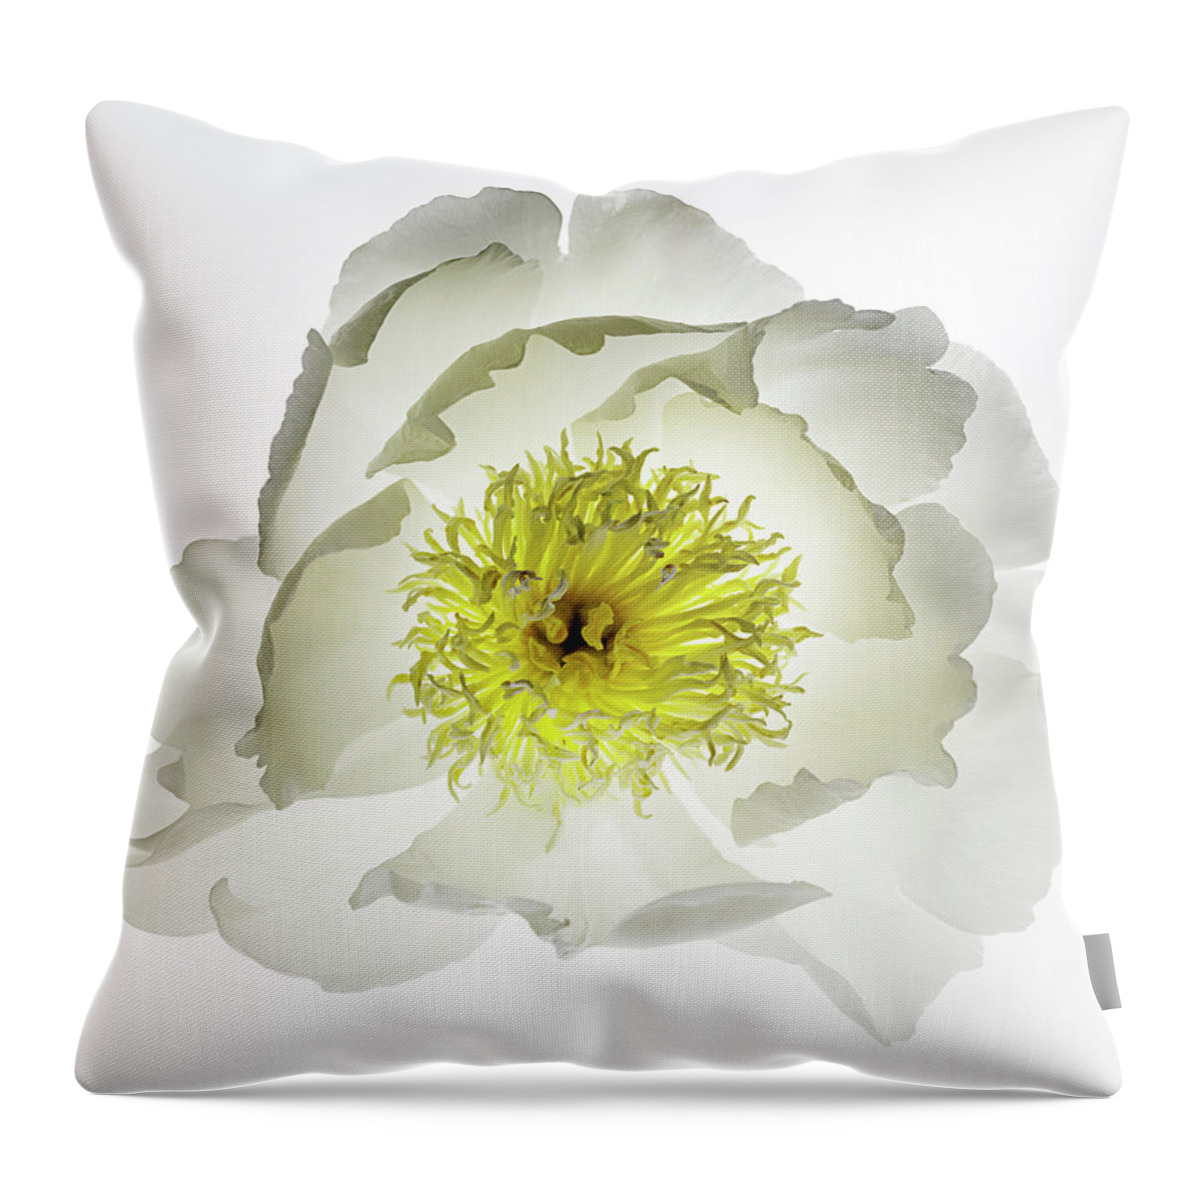 Serenity - Square and Horizontal Decorative Throw Pillow